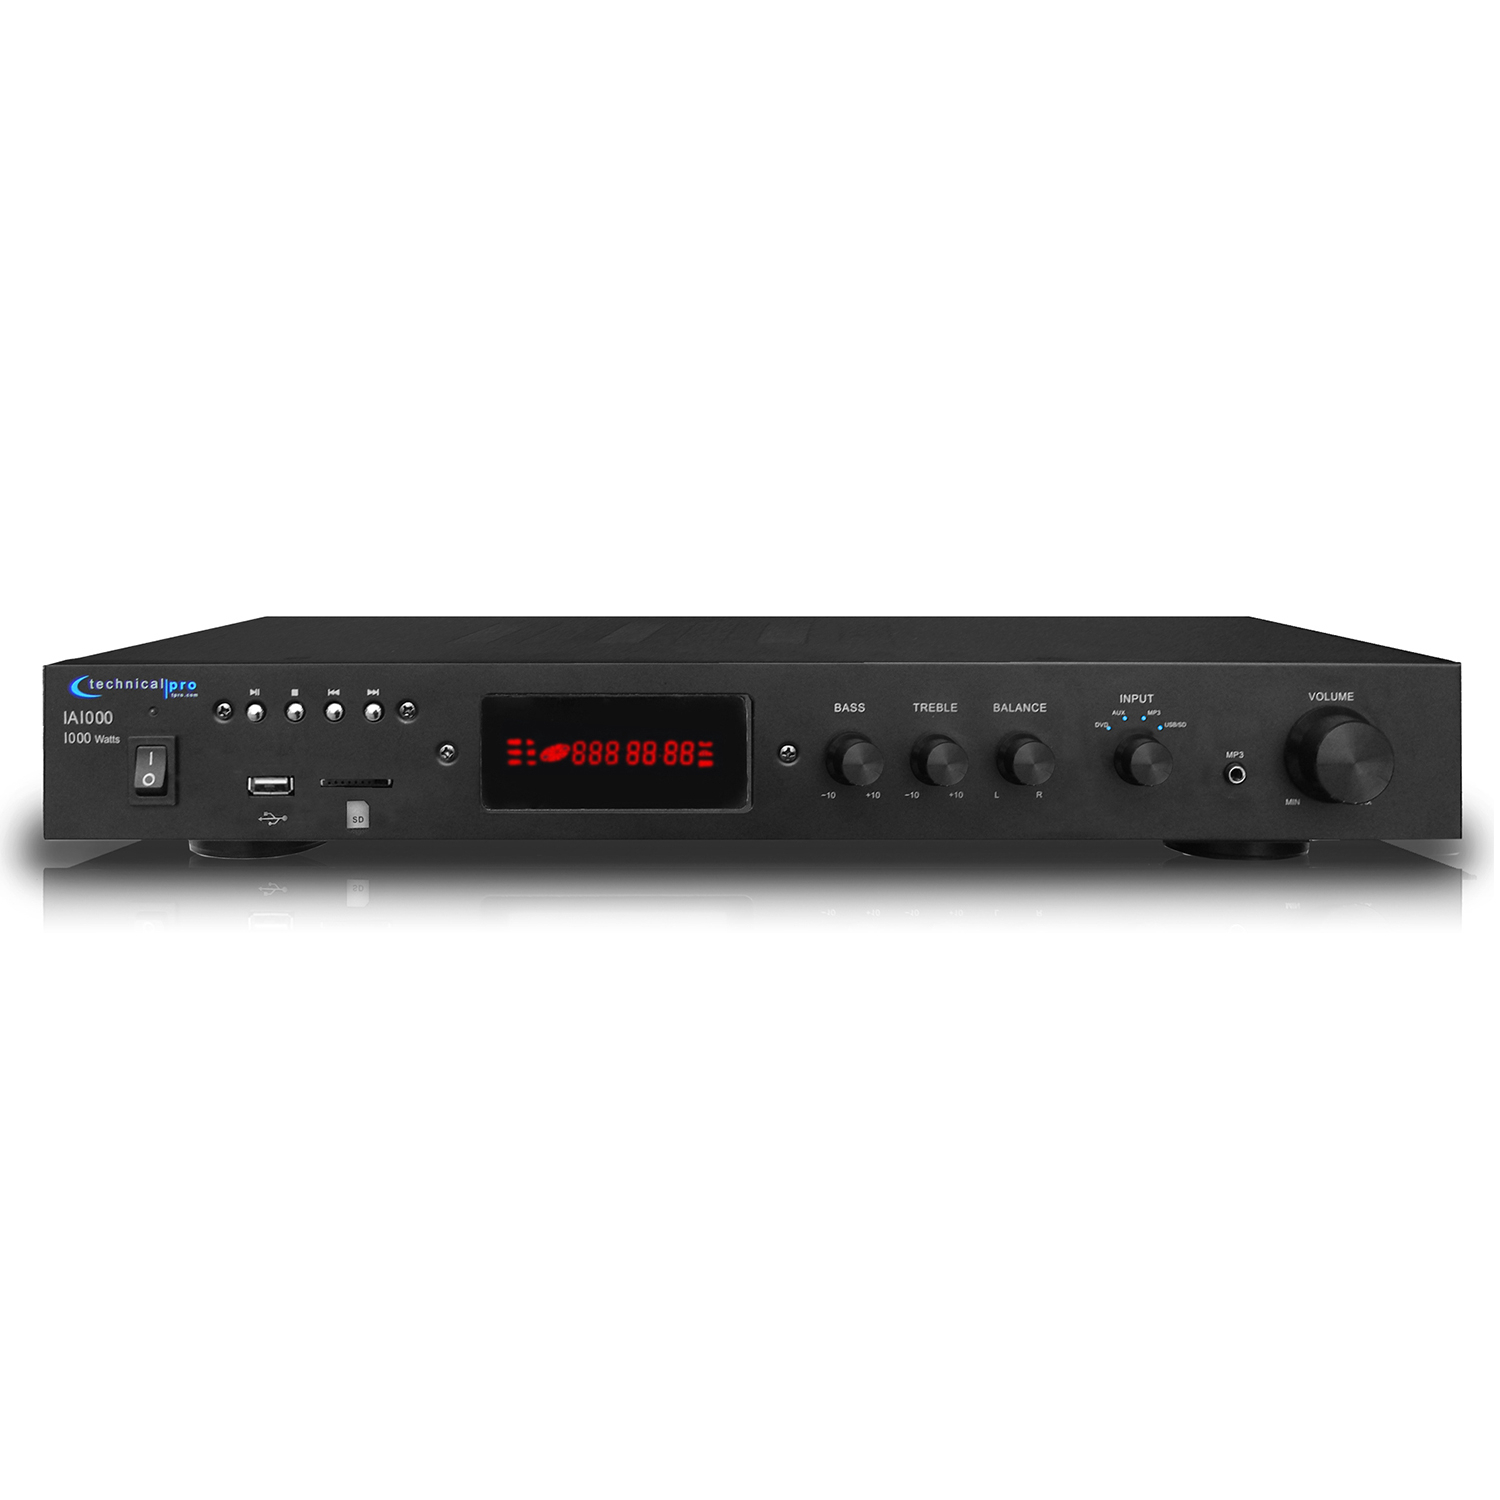 Technical Pro 1000 Watts Integrated Amplifier W/ USB, SD Card, RCA, AUX Inputs, Balance Control, Fluorescent Display, Bass & Treble Control